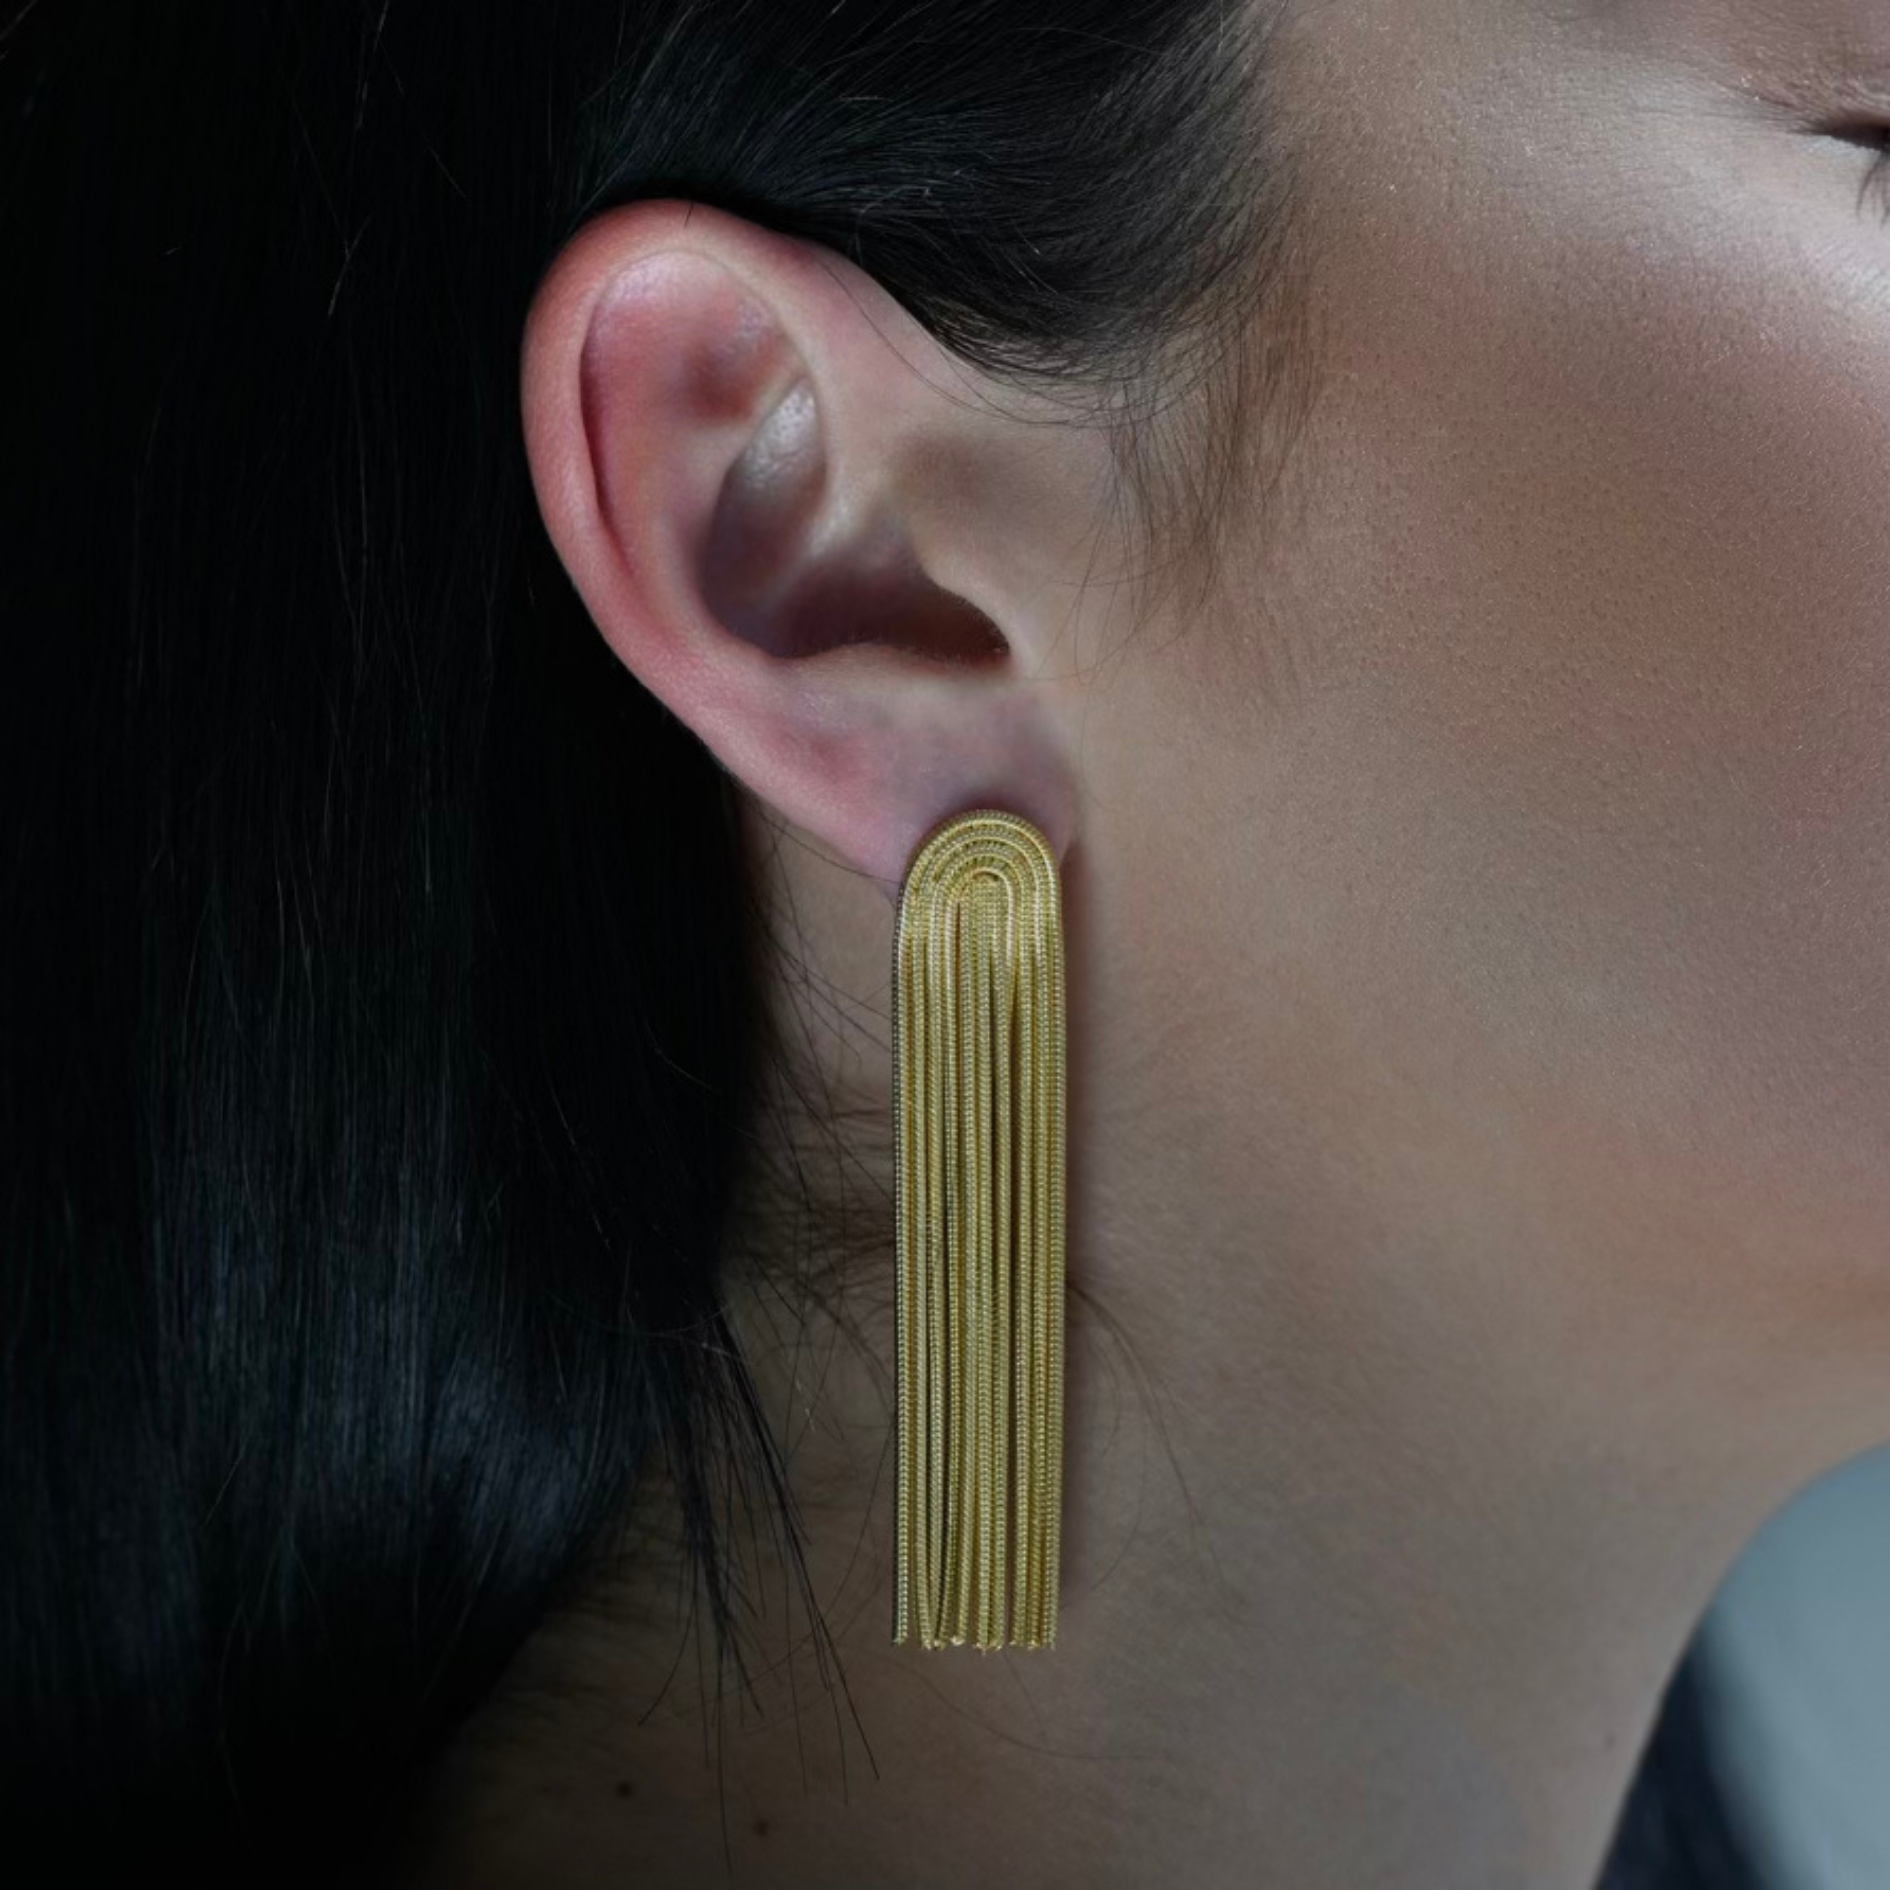 CLEO Gold Drop Earrings. Rustic look with 11 rope lookalike chains droping forming a U half square shape in the post top part of the earrings.